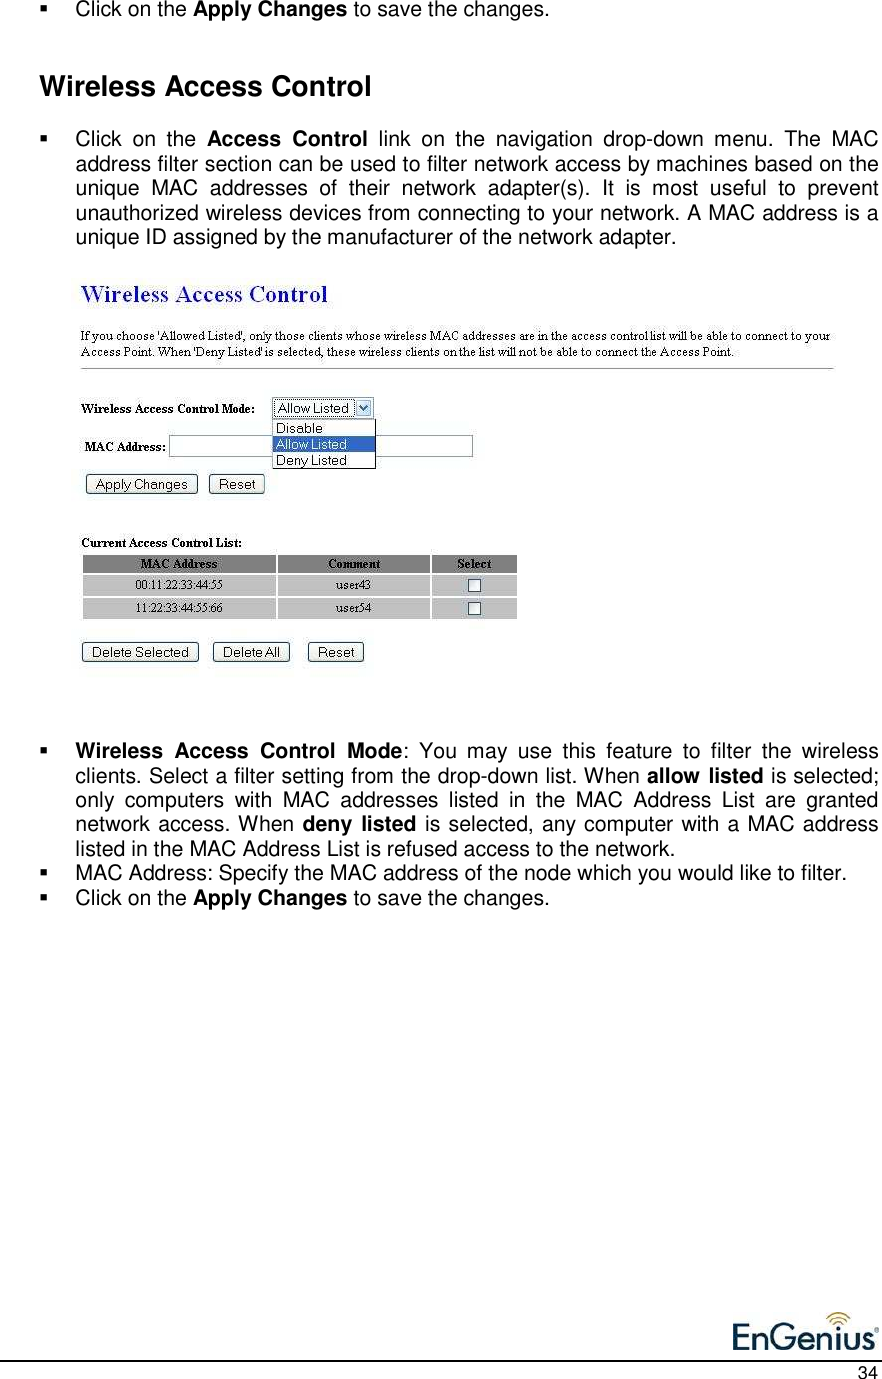    34   Click on the Apply Changes to save the changes.      Wireless Access Control   Click  on  the  Access  Control  link  on  the  navigation  drop-down  menu.  The  MAC address filter section can be used to filter network access by machines based on the unique  MAC  addresses  of  their  network  adapter(s).  It  is  most  useful  to  prevent unauthorized wireless devices from connecting to your network. A MAC address is a unique ID assigned by the manufacturer of the network adapter.                      Wireless  Access  Control  Mode:  You  may  use  this  feature  to  filter  the  wireless clients. Select a filter setting from the drop-down list. When allow listed is selected; only  computers  with  MAC  addresses  listed  in  the  MAC  Address  List  are  granted network access. When deny listed is selected, any computer with a MAC address listed in the MAC Address List is refused access to the network.   MAC Address: Specify the MAC address of the node which you would like to filter.    Click on the Apply Changes to save the changes.     